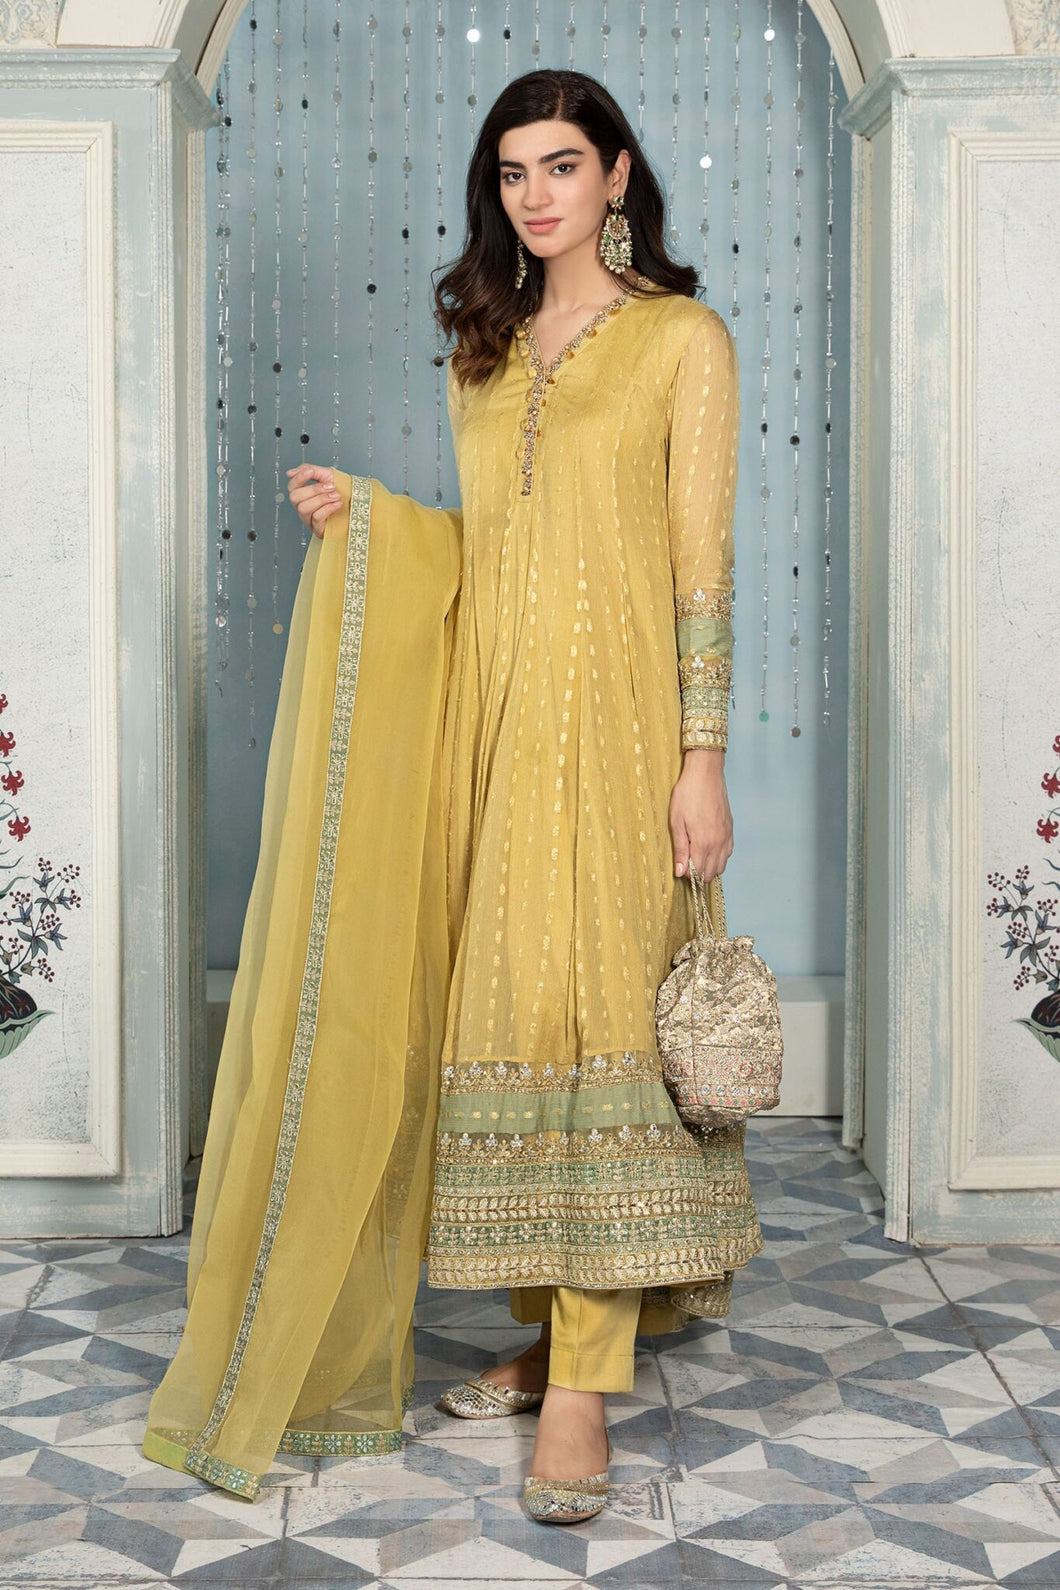 MARIA B READY TO WEAR – Suit Lime Yellow SF-EA22-05